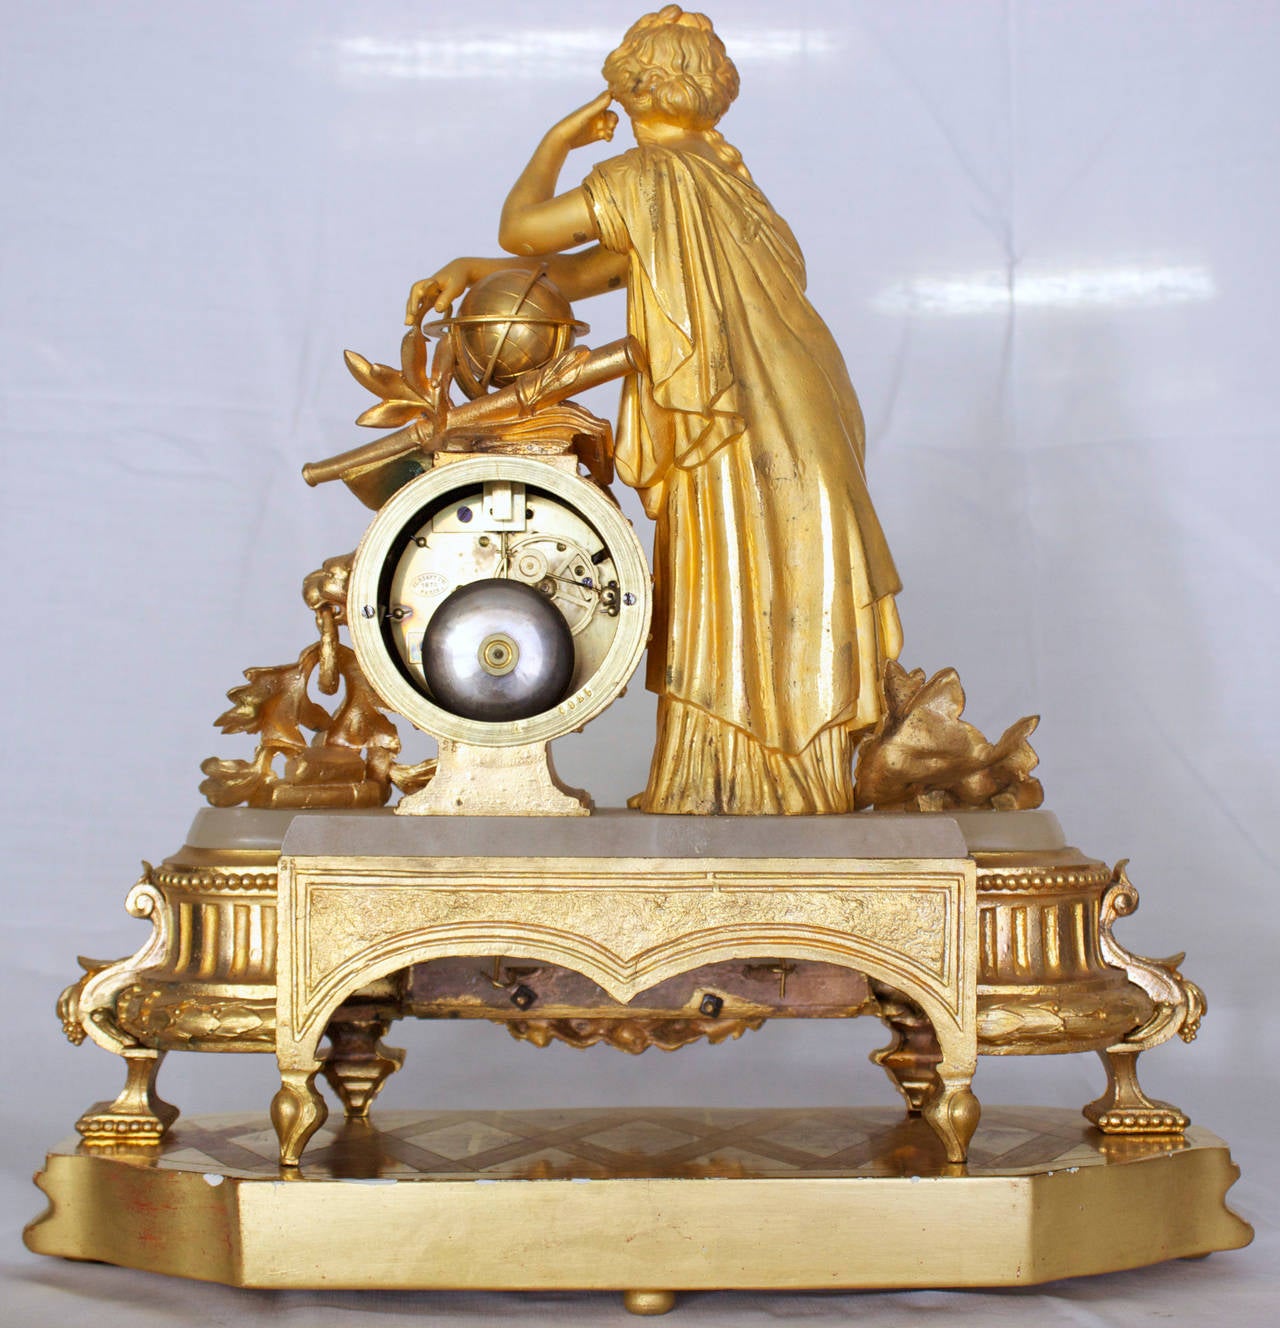 Magnificent clock in chased and ormolu bronze representing Urania ,daughter of Zeus ,an allegory of Astronomy and Astrology (the Greek did not differentiate).The Muse is dressed a l'Antique and is represented thinking with a finger of the left hand